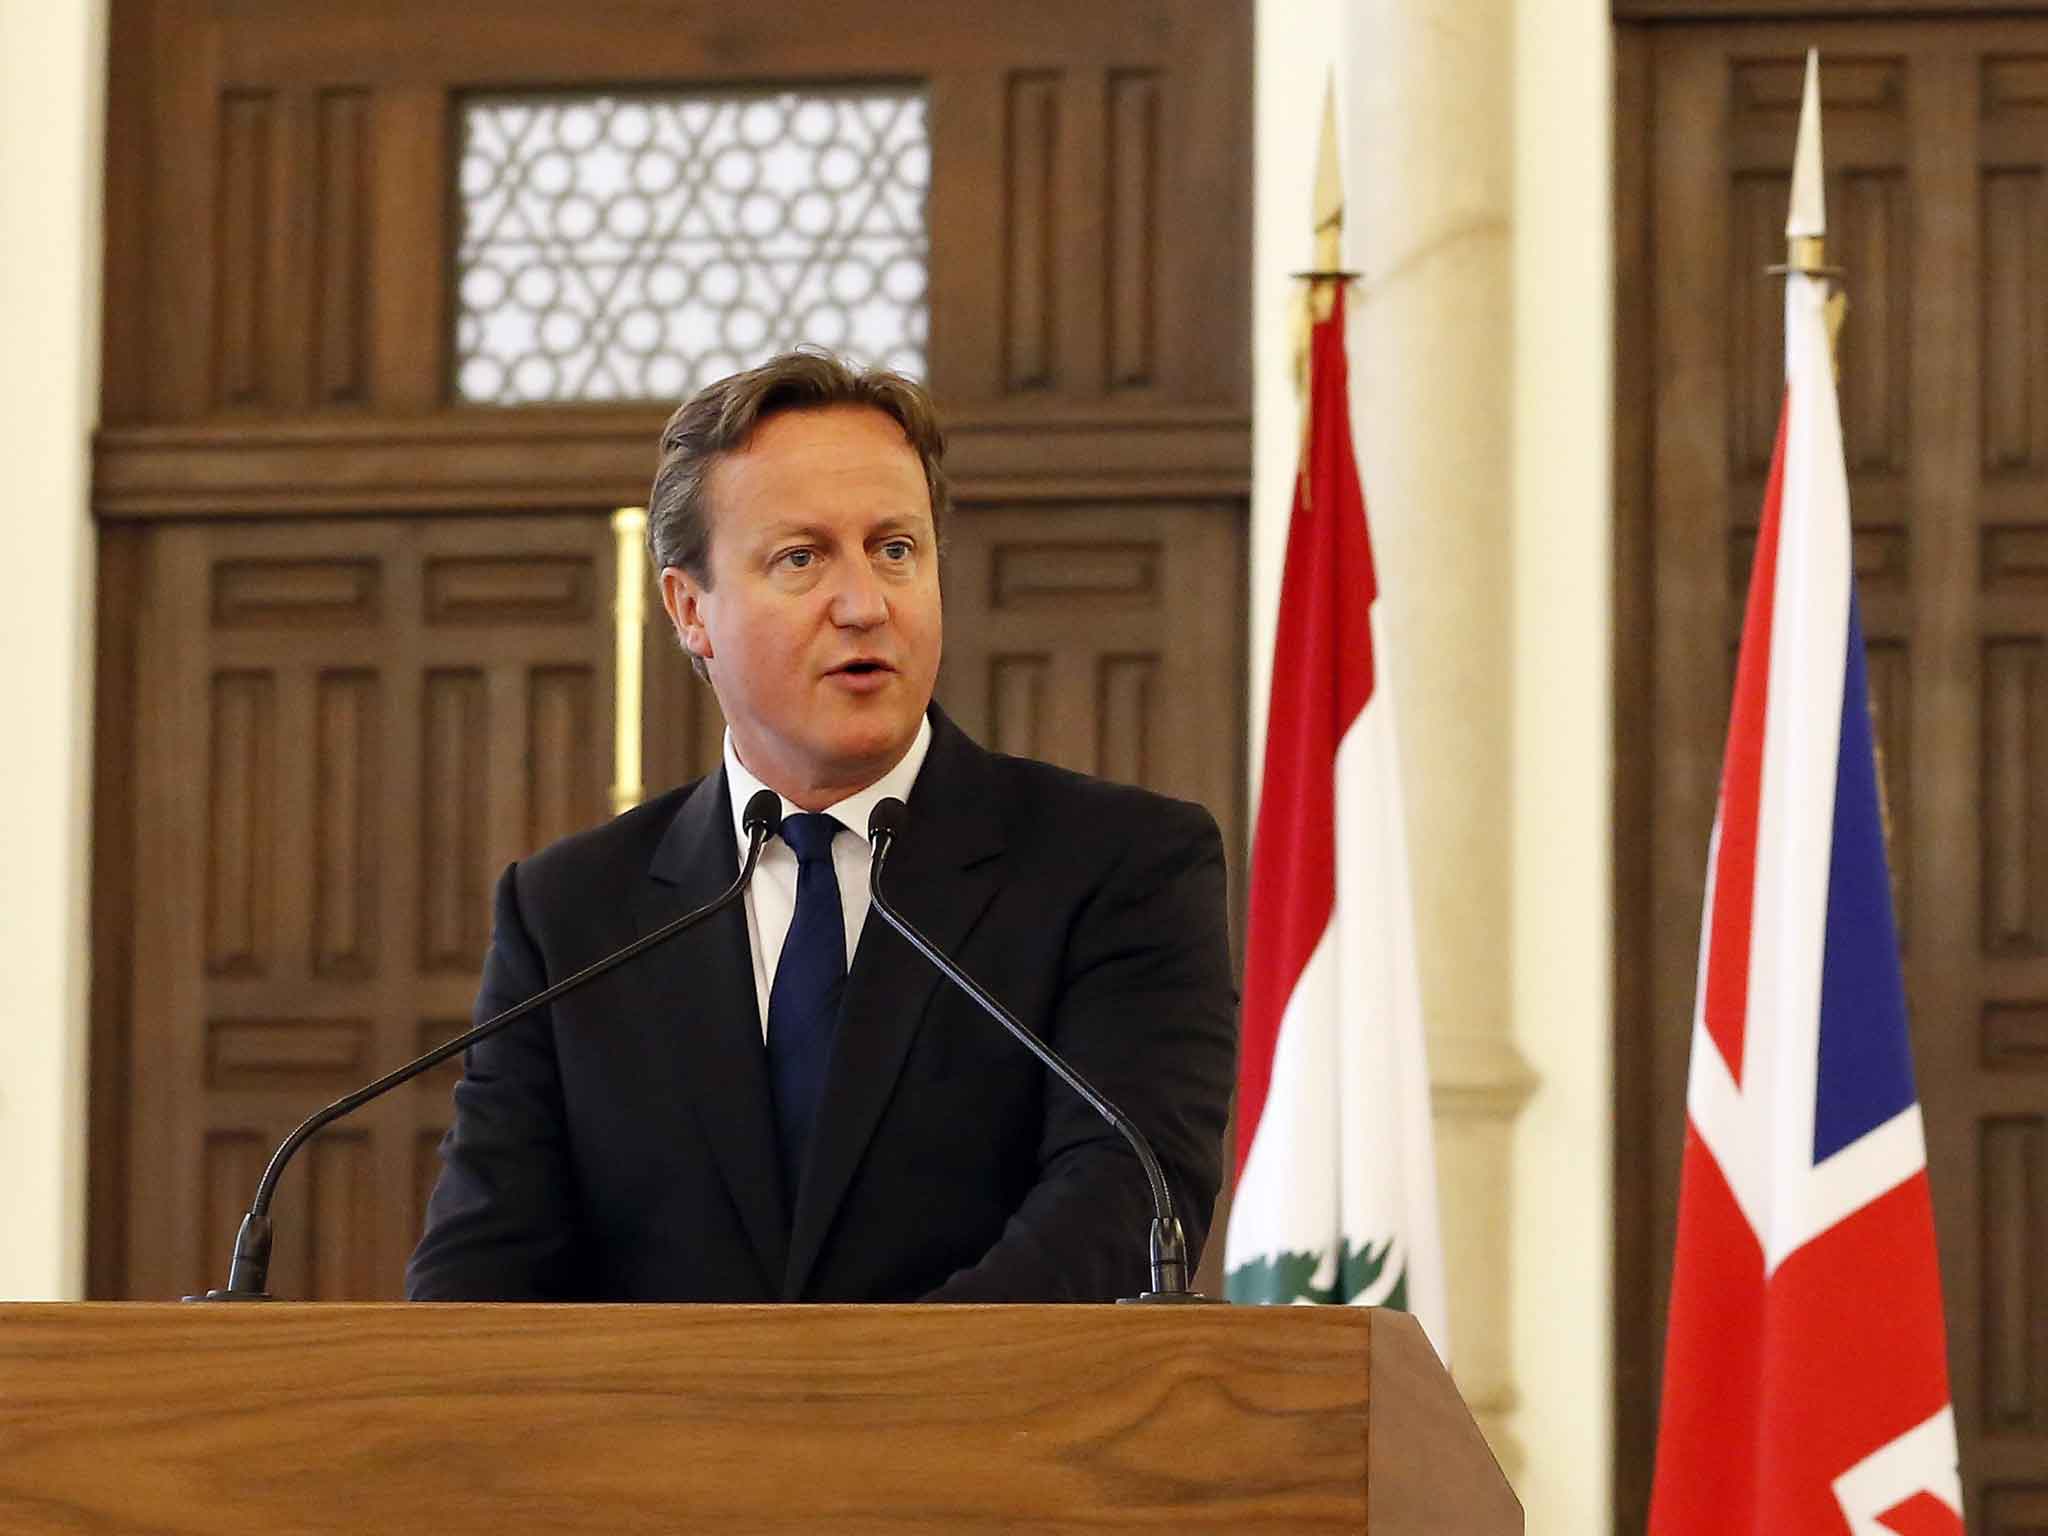 Mr Cameron said there should be no distinction between a humanitarian response to Syrian refugees and military action